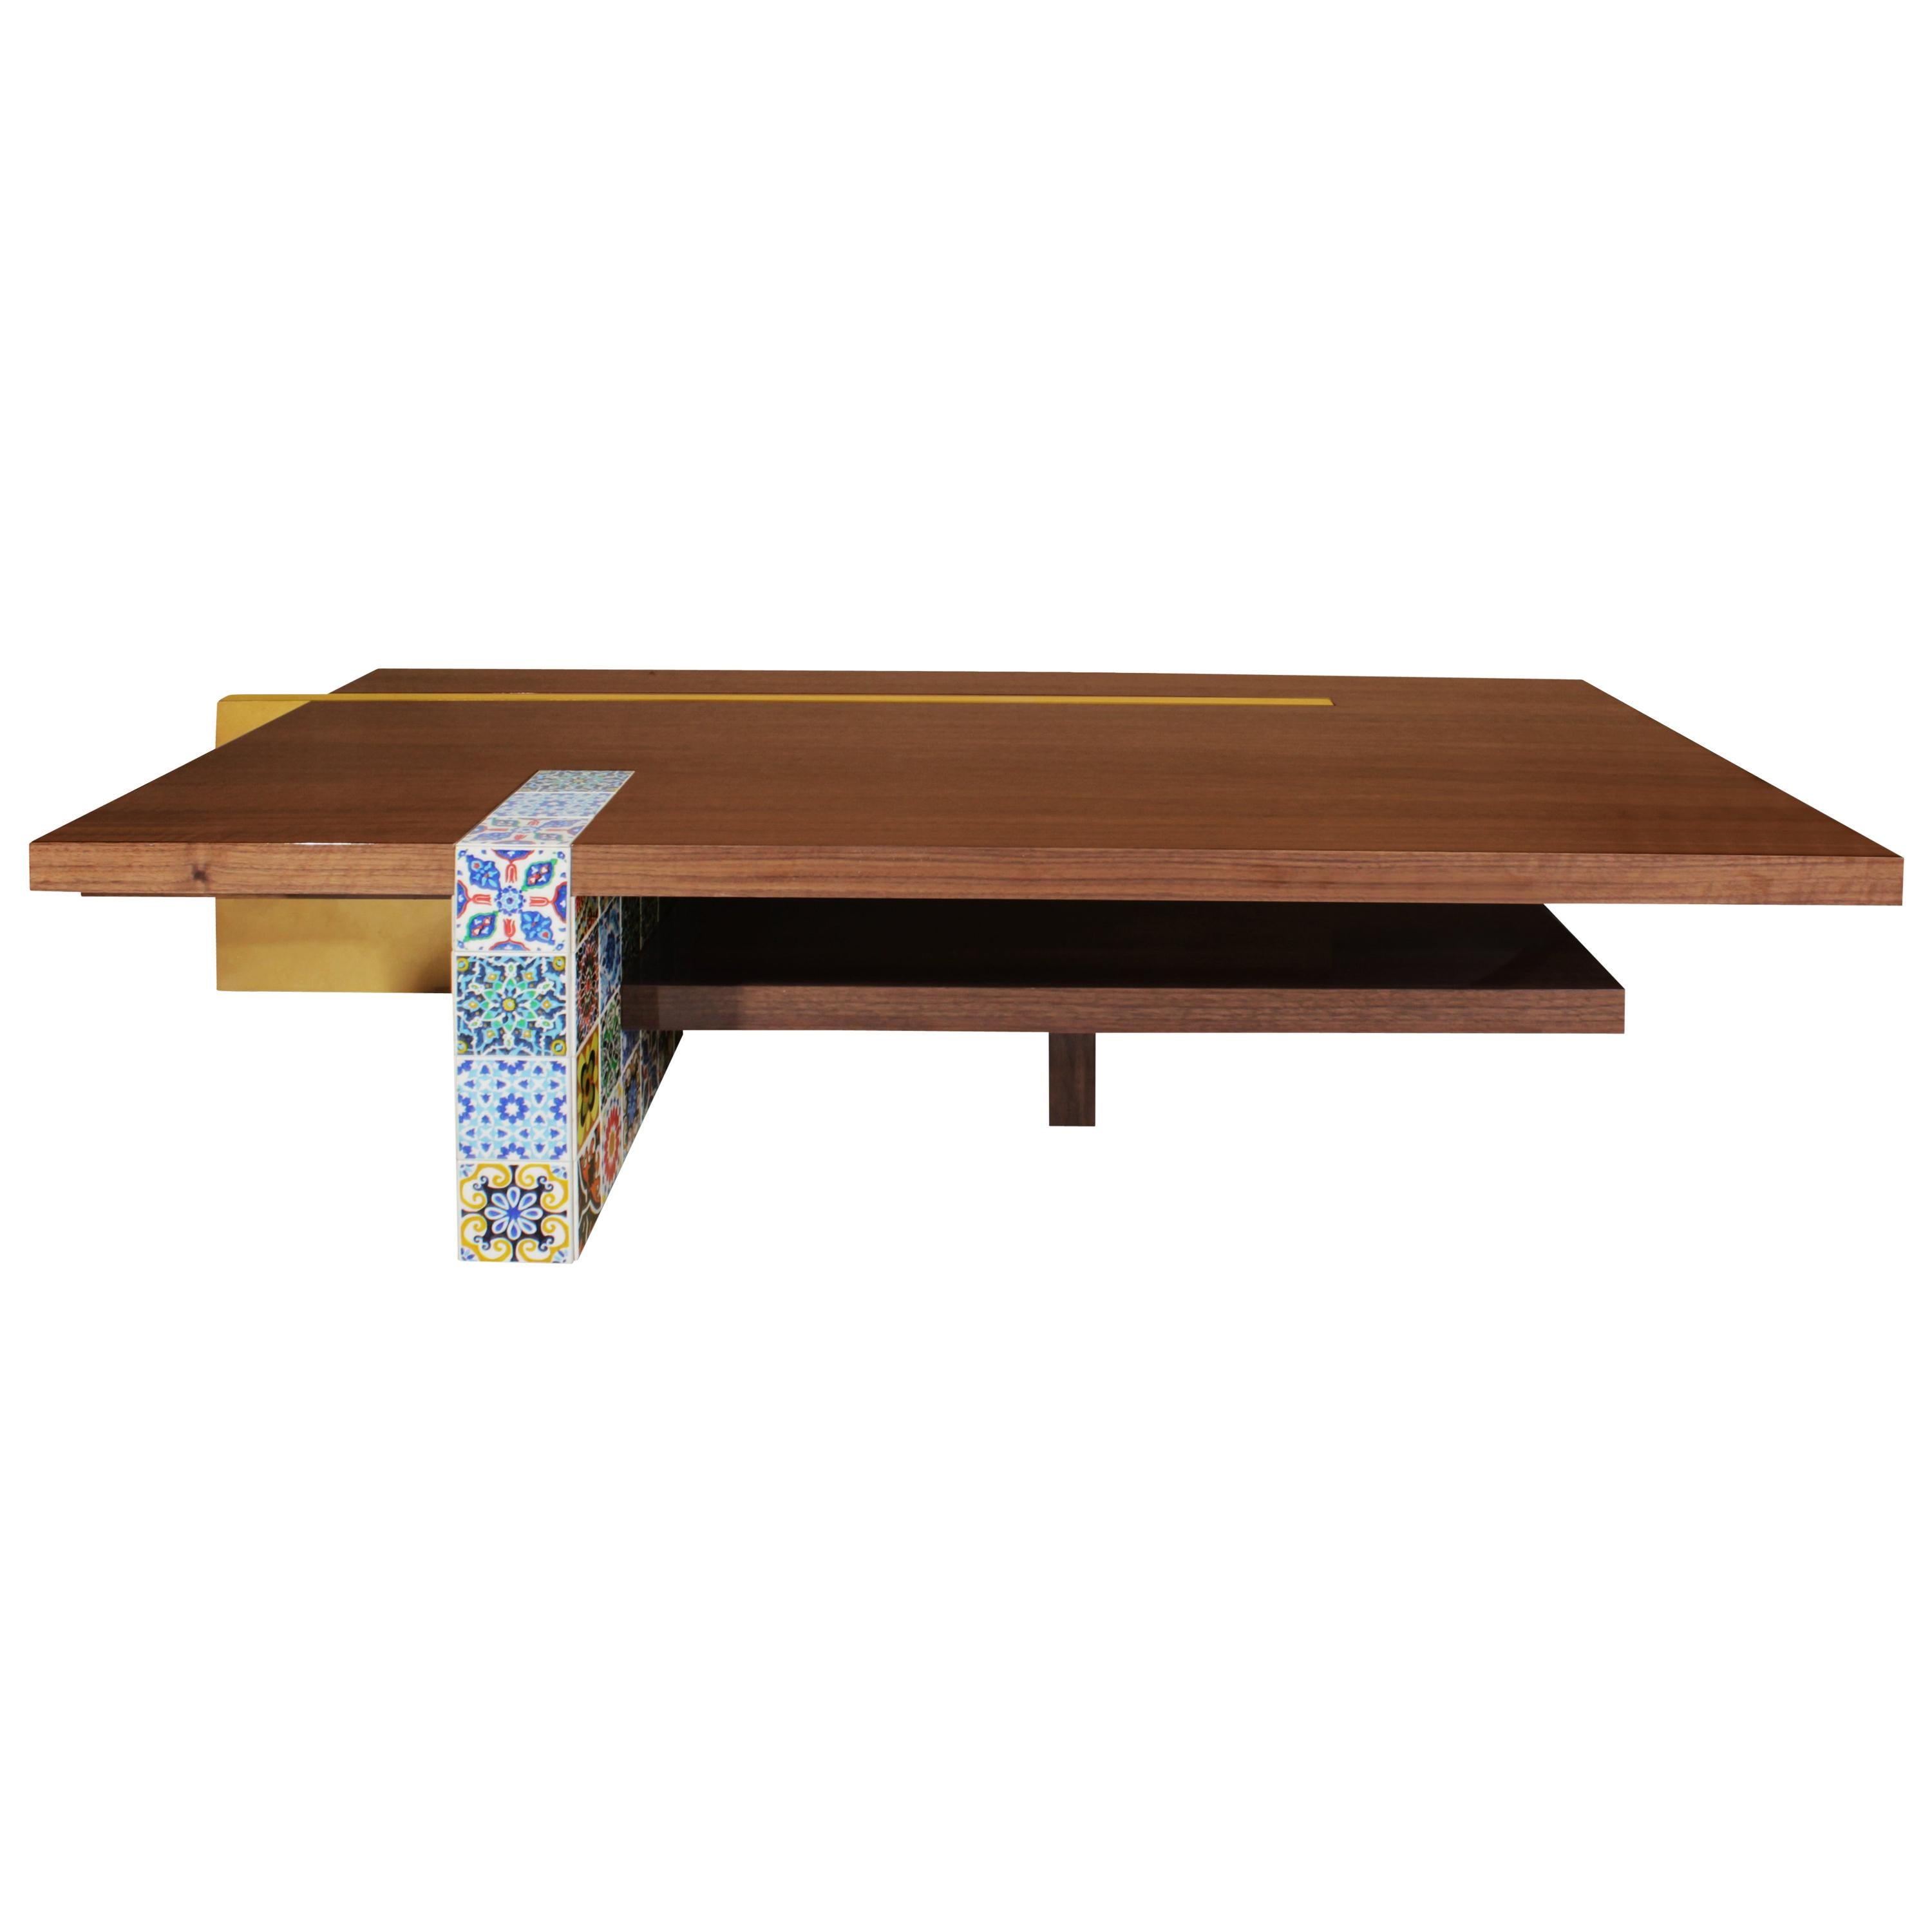 21st Century Camelia Center Table Walnut Wood Layers Hand Painted Tiles For Sale